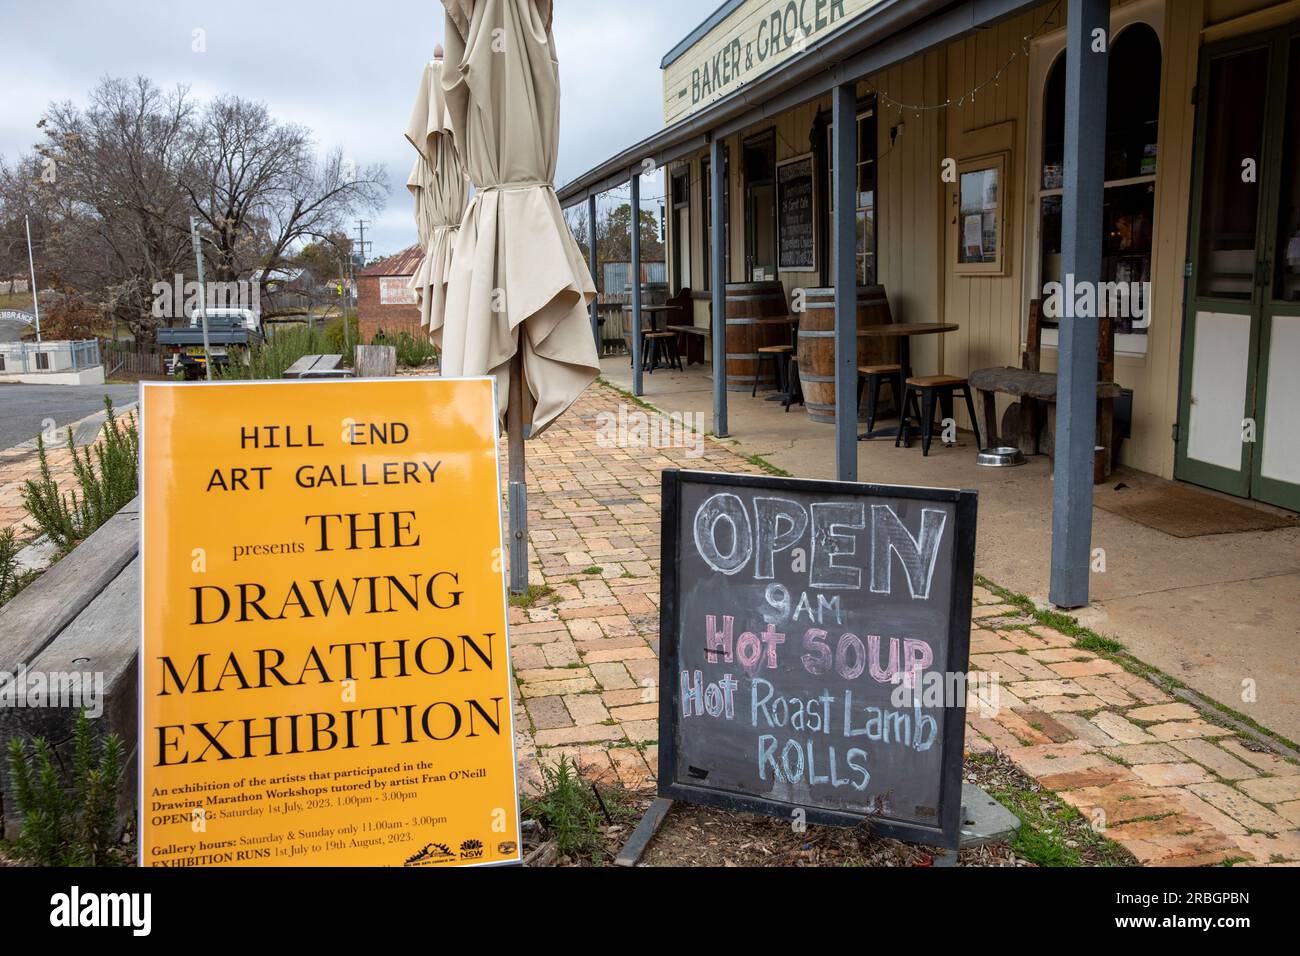 Hill End historic gold rush town in New South Wales, art gallery and drawing exhibition, NSW,Australia Stock Photo